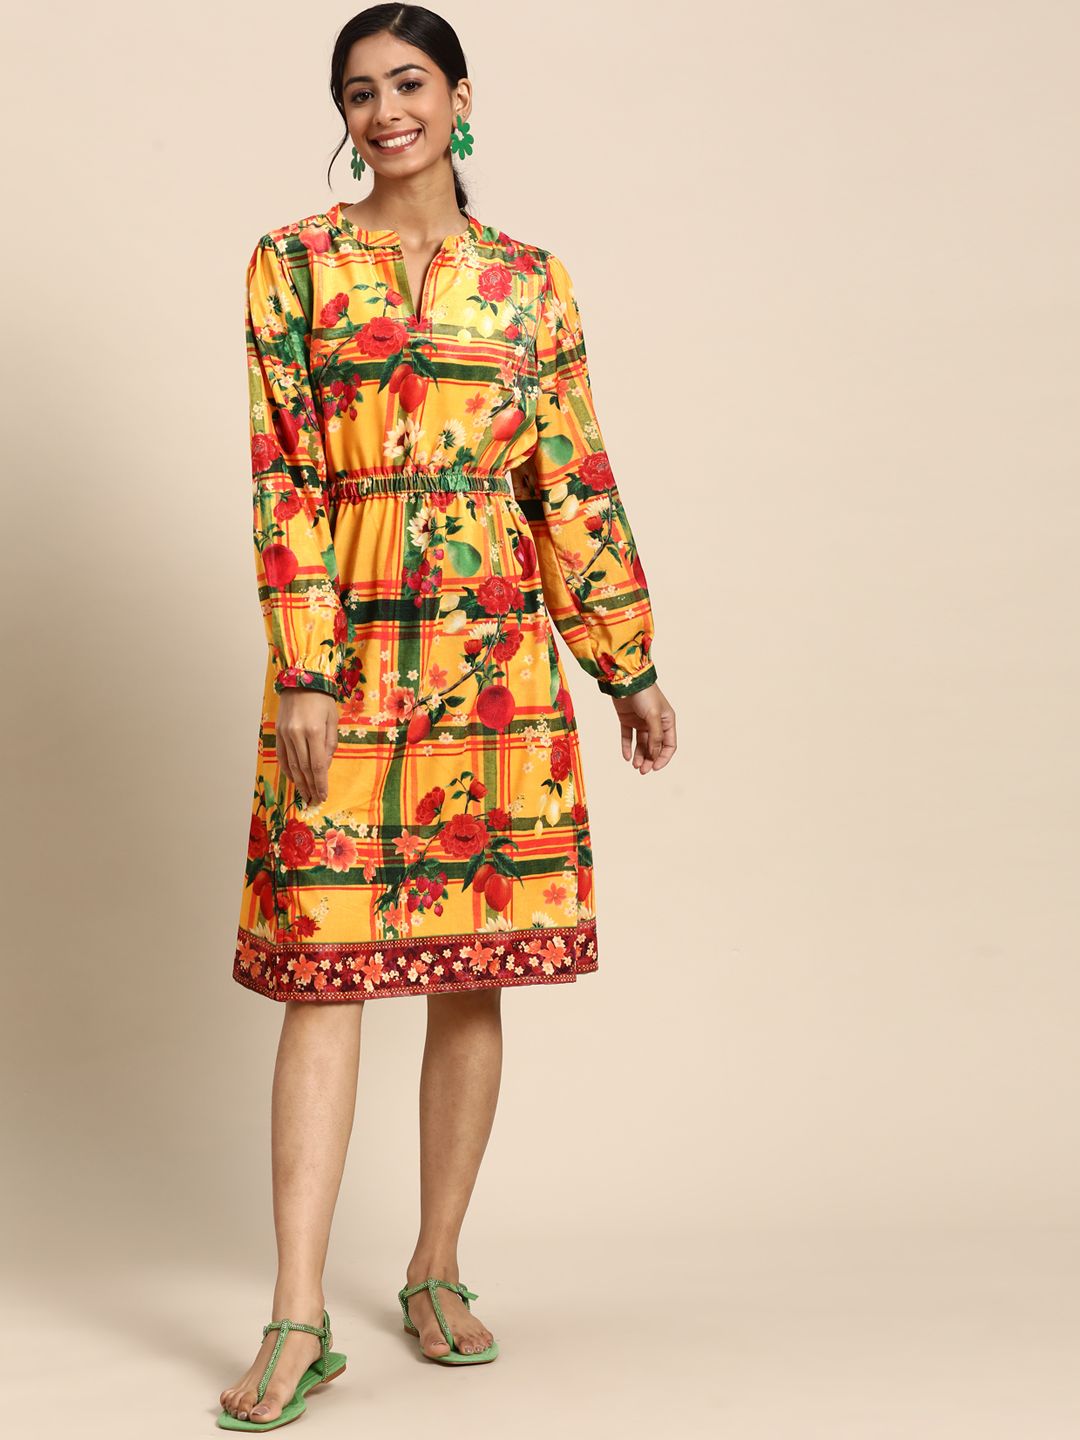 Sangria Mustard Yellow & Green Floral A-Line Dress Price in India